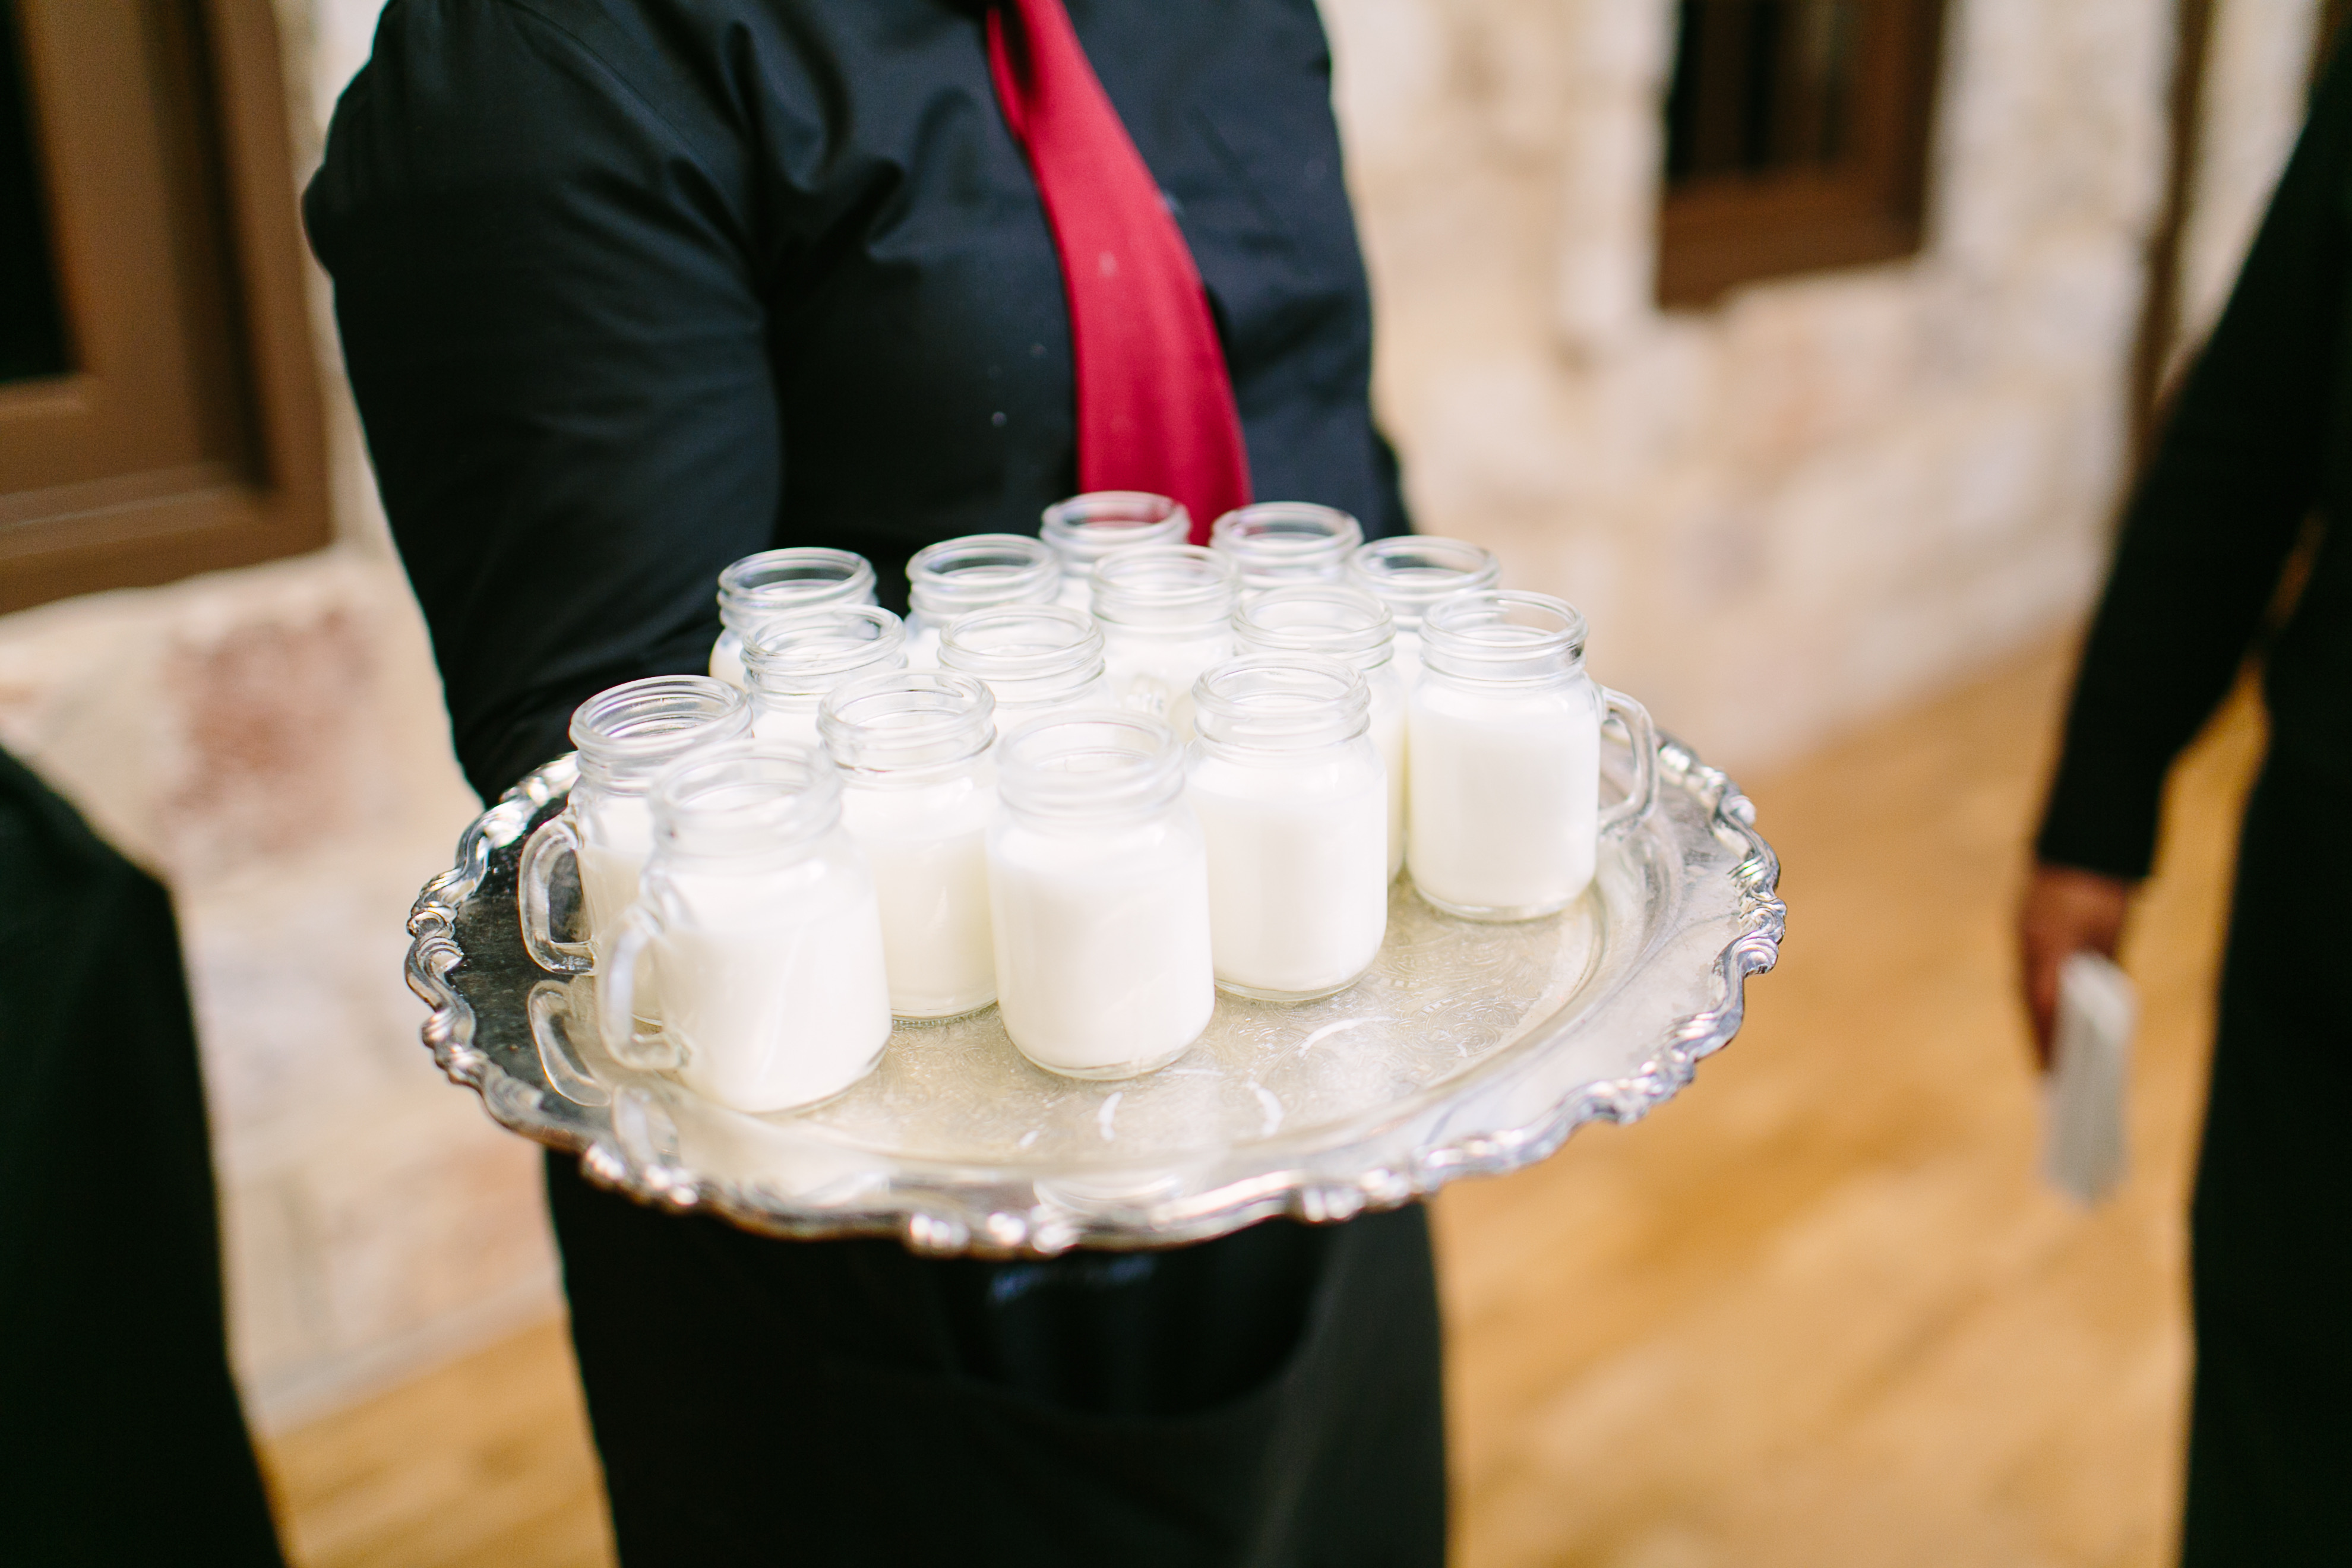 Mugs of milk on a silver platter held by a server